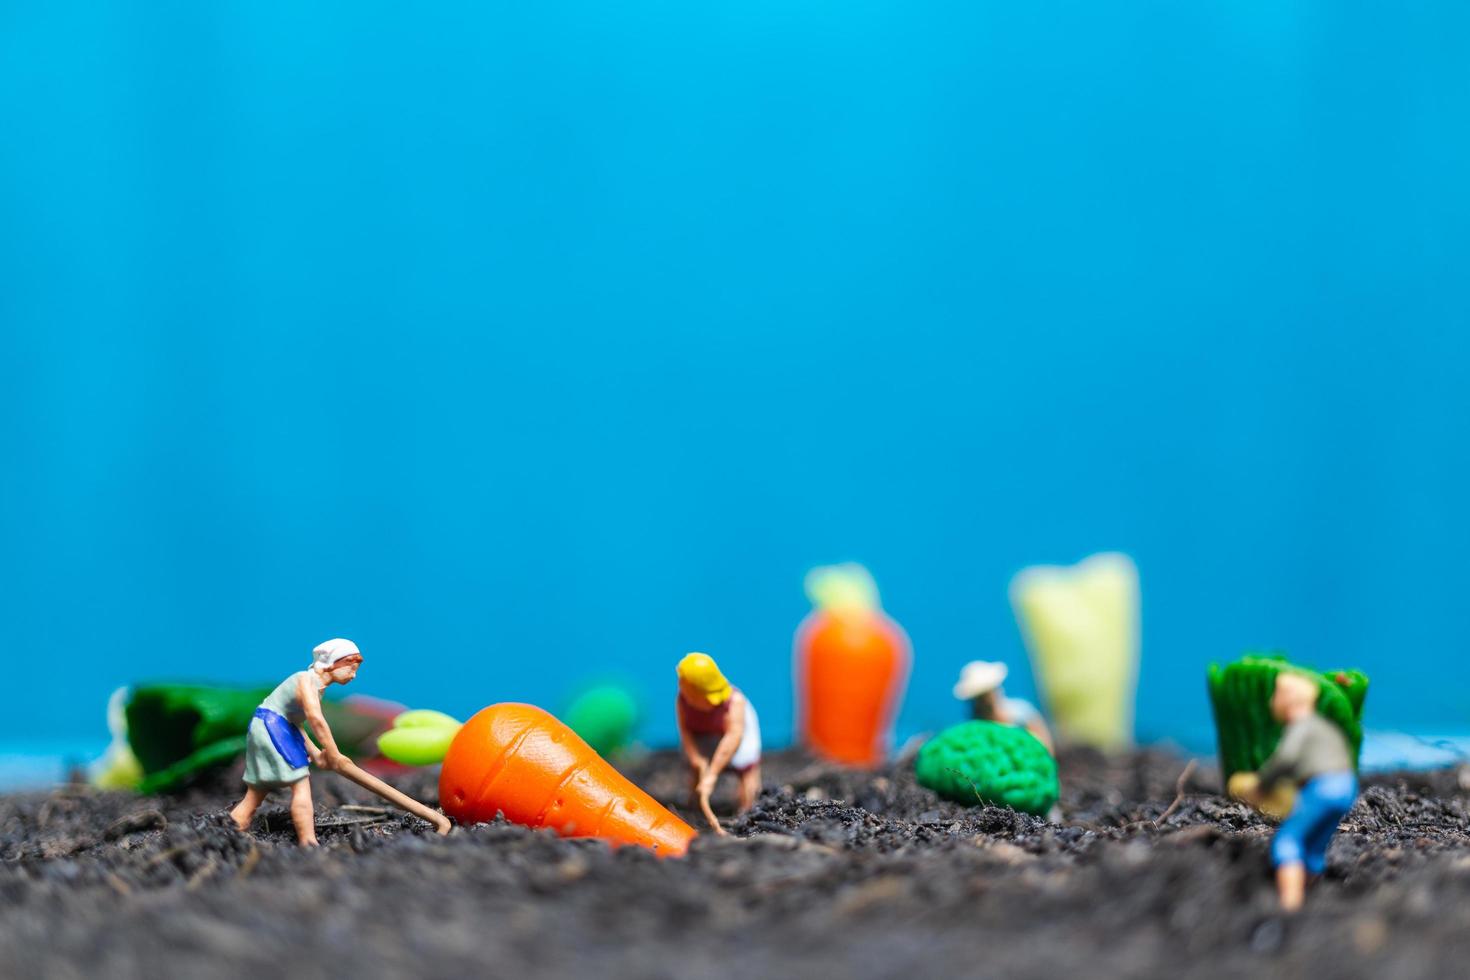 Miniature gardeners harvesting vegetables, agricultural concept photo